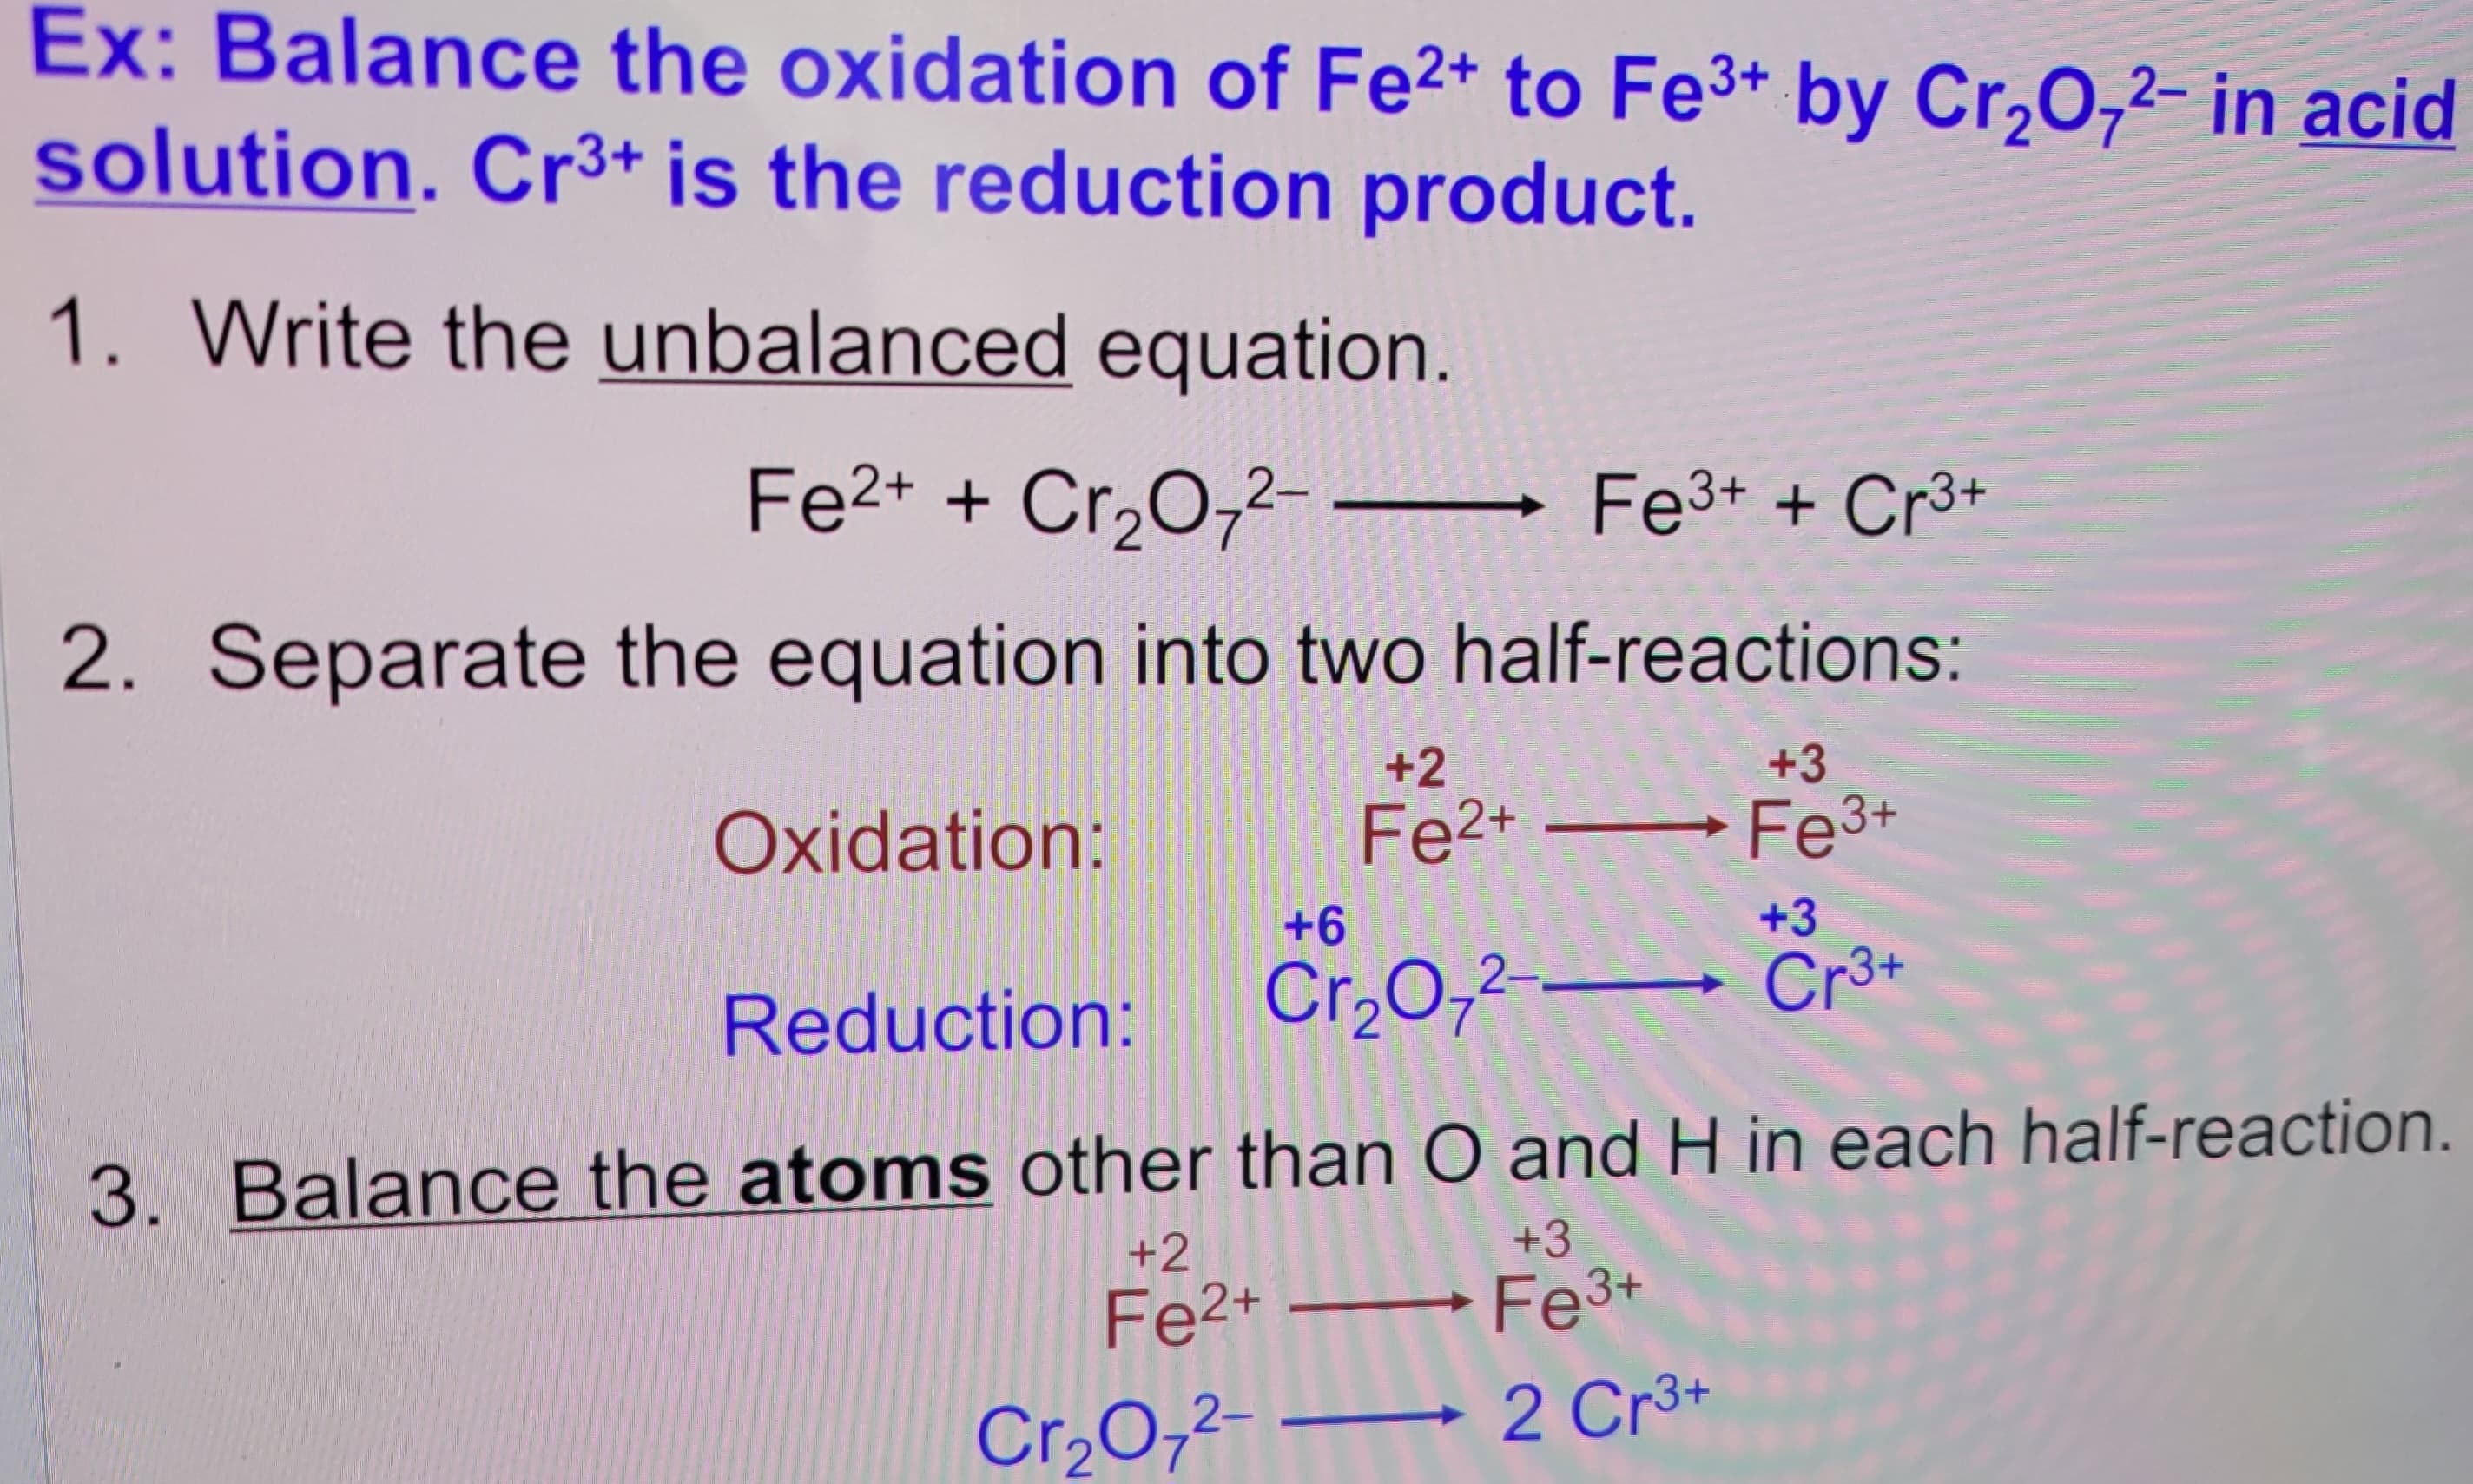 Ex: Balance the oxidation of Fe2+ to Fe3+ by Cr2O72- in acid
solution. Cr3+ is the reduction product.
1. Write the unbalanced equation.
Fe2+ + Cr2O72-
Fe3+ + Cr3+
2. Separate the equation into two half-reactions:
Oxidation:
Reduction:
+6
+2
Fe2+
11
Cr2O72-
+3
Fe3+
+3
Cr3+
3. Balance the atoms other than O and H in each half-reaction.
+2
Fe2+
11
Cr₂O2--
+3
Fe3+
2 Cr3+